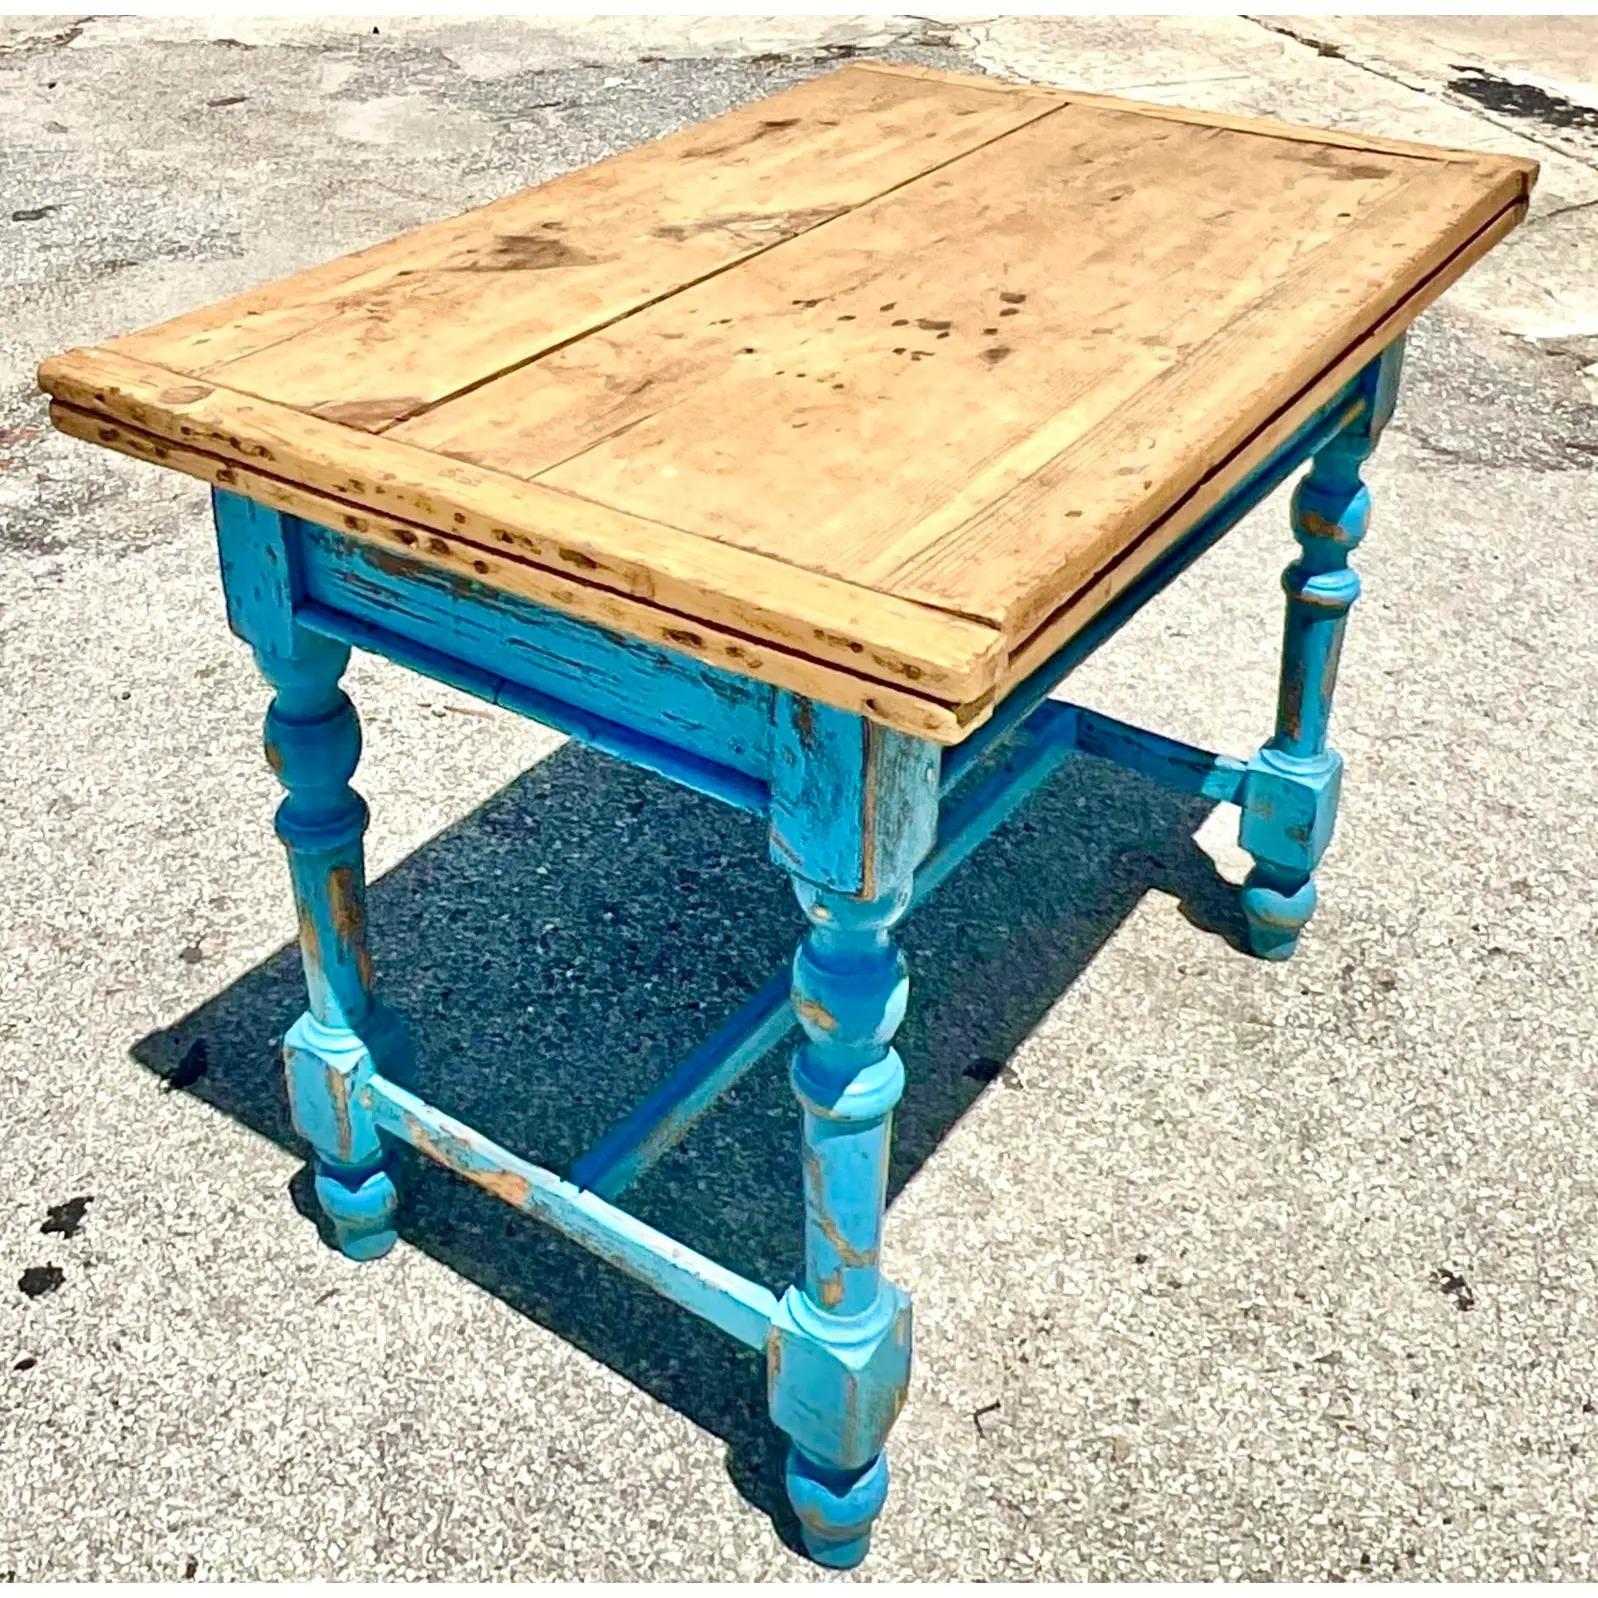 North American Vintage Rustic Expanding Farm Table For Sale